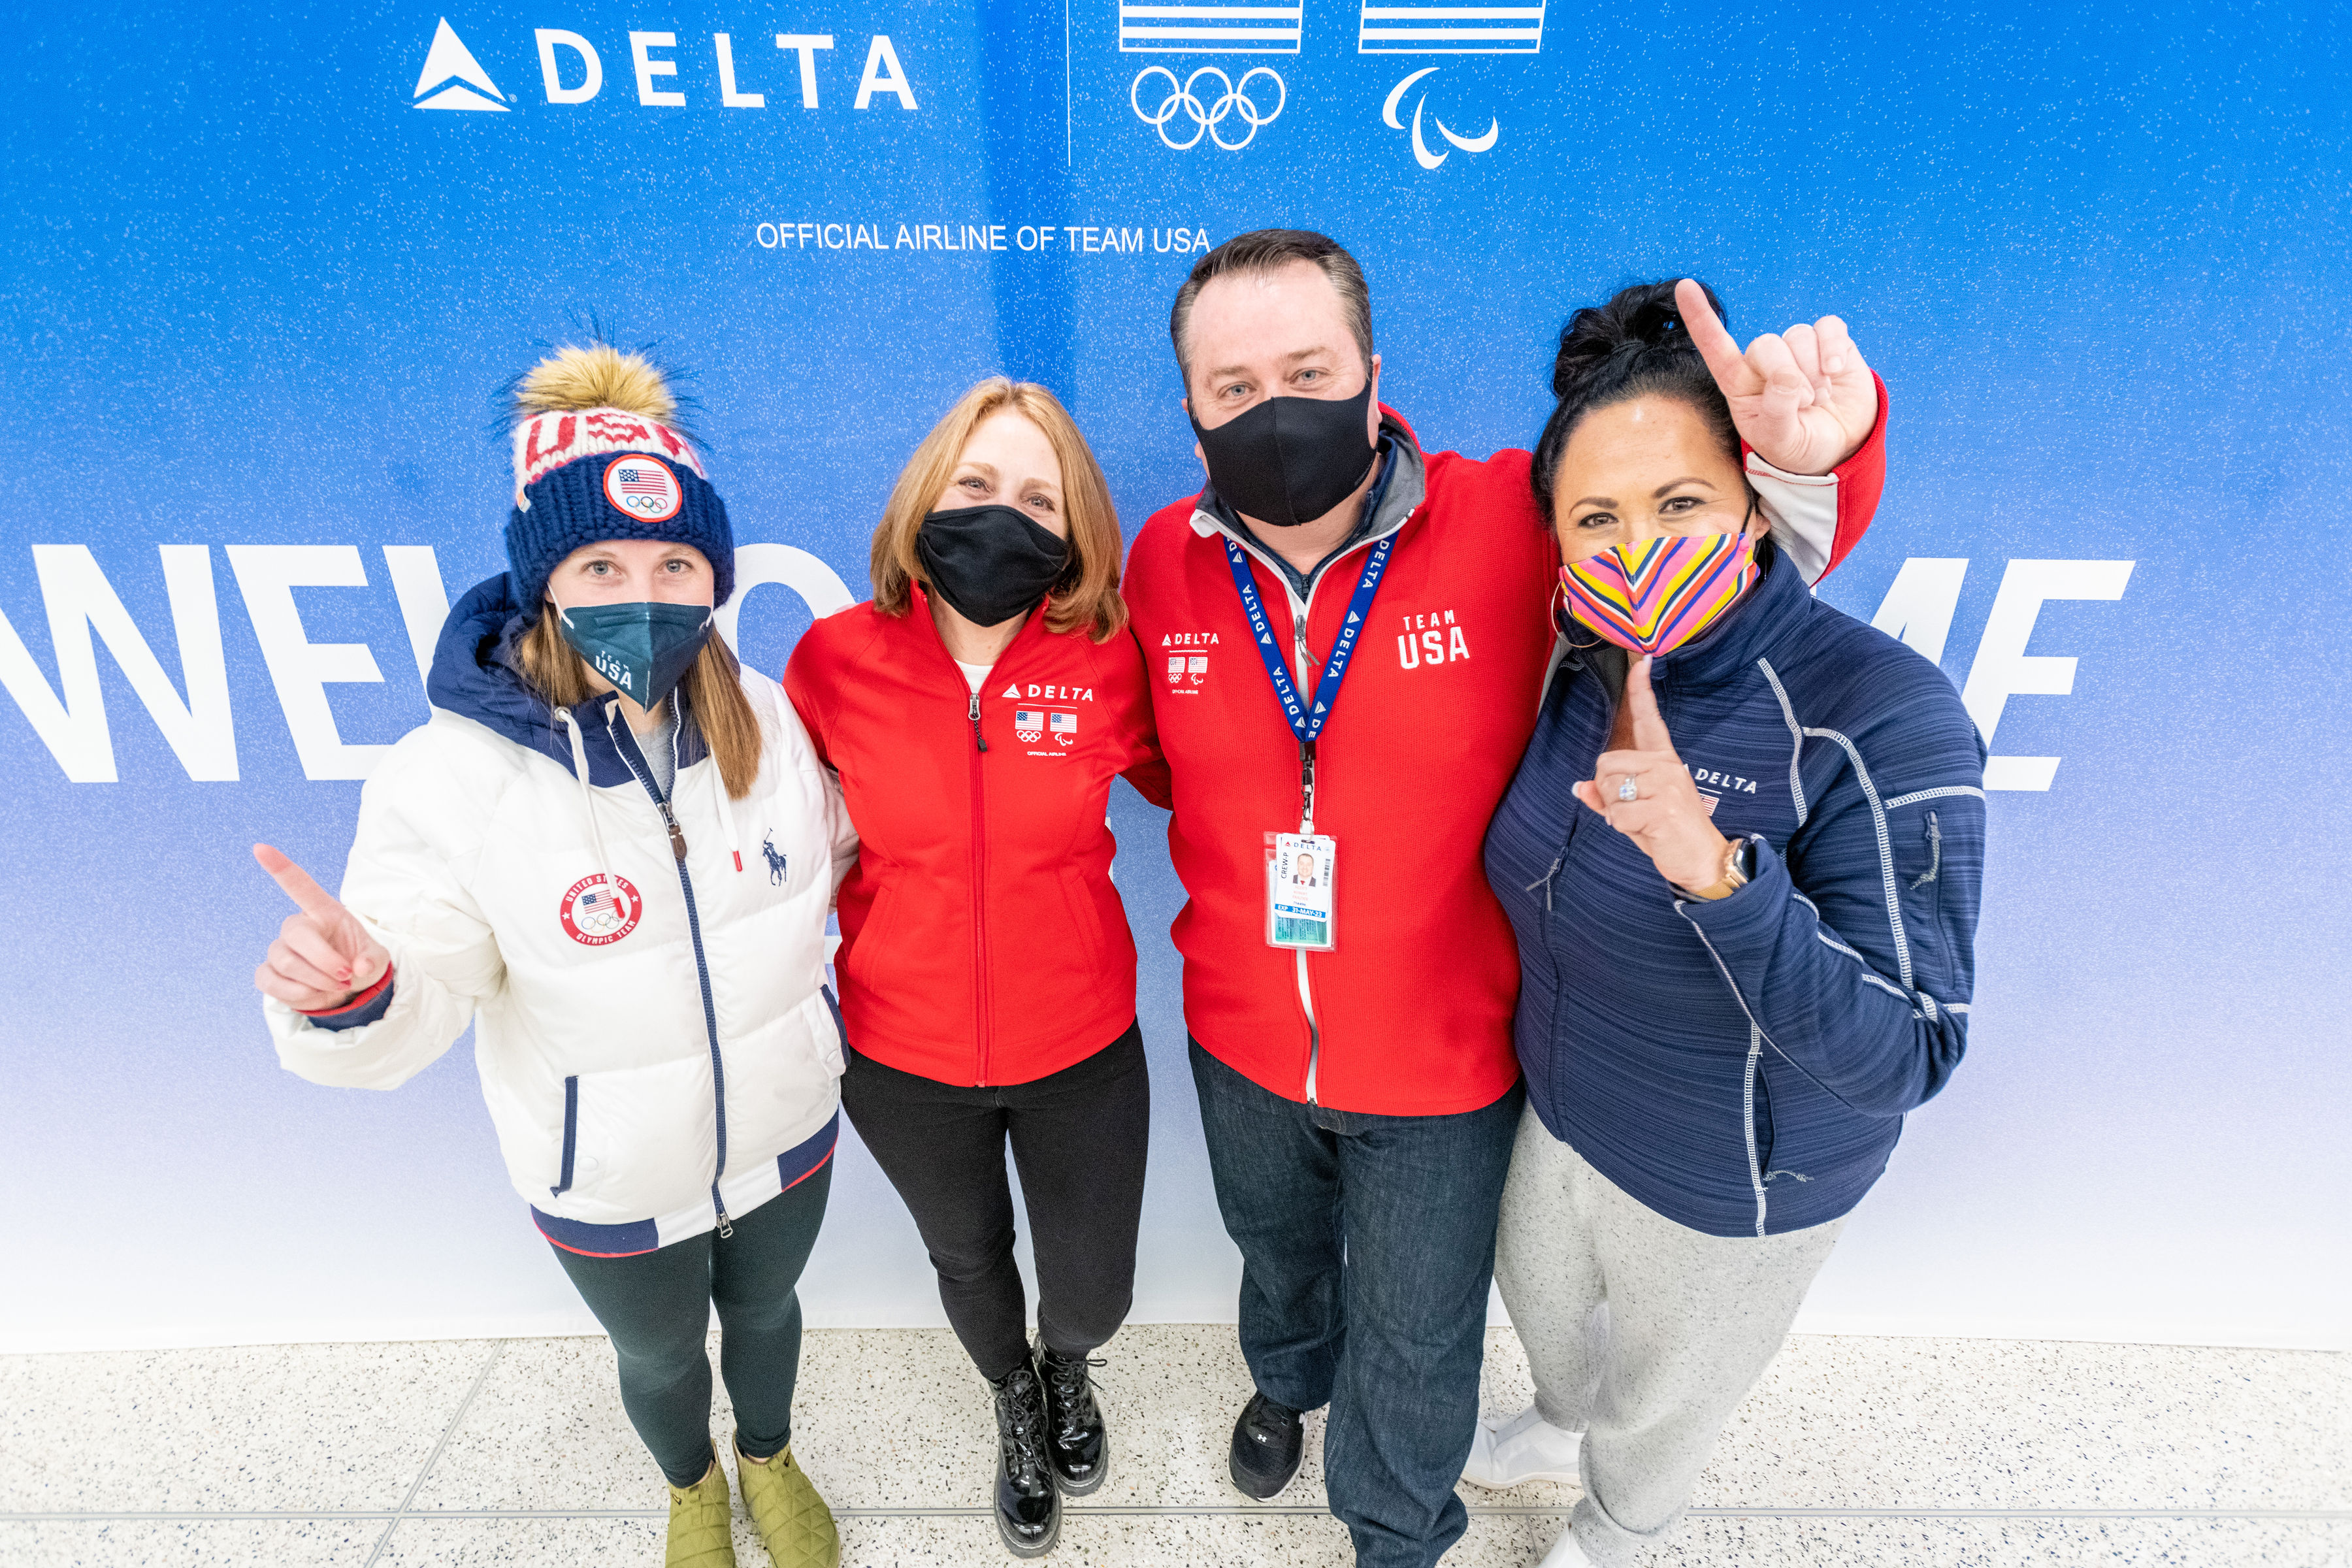 (From left to right) Nikki Leonard, fiancee of speedskater Ryan Pivorotto, Kris, a Delta Air Lines flight attendant and Nikki's mother, Scott, a Delta Air Lines First Officer and uncle of pairs figureskater Brandon Frazier, and Heather, wife of Scott